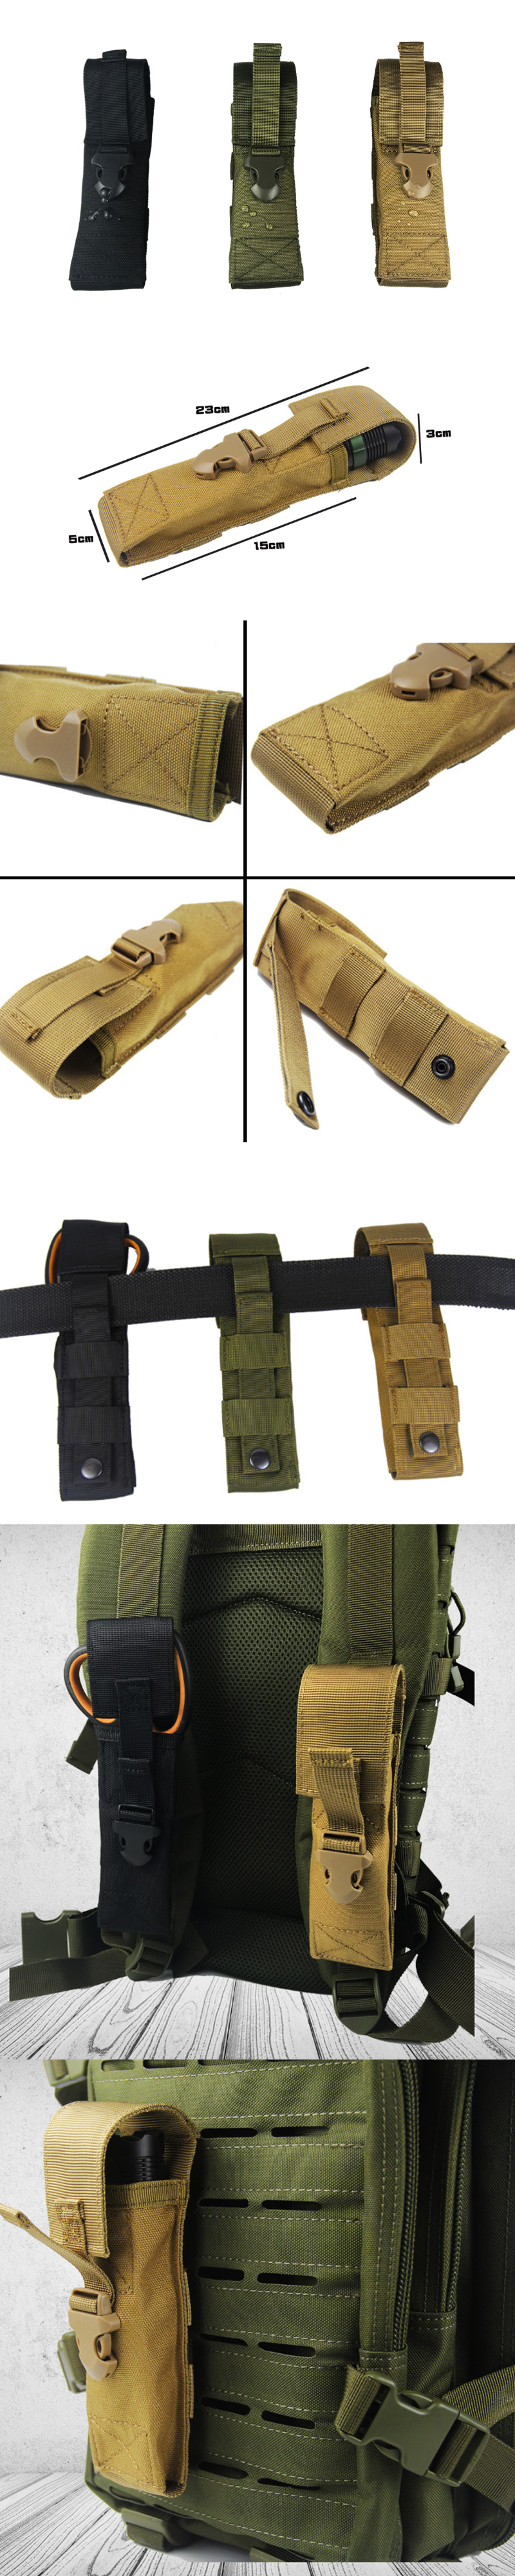 1000D-Nylon-Flashlight-Tactical-Bag-Multi-Functional-Molle-Pouch-Camping-Hunting-Waterproof-Toolkit-1523888-1